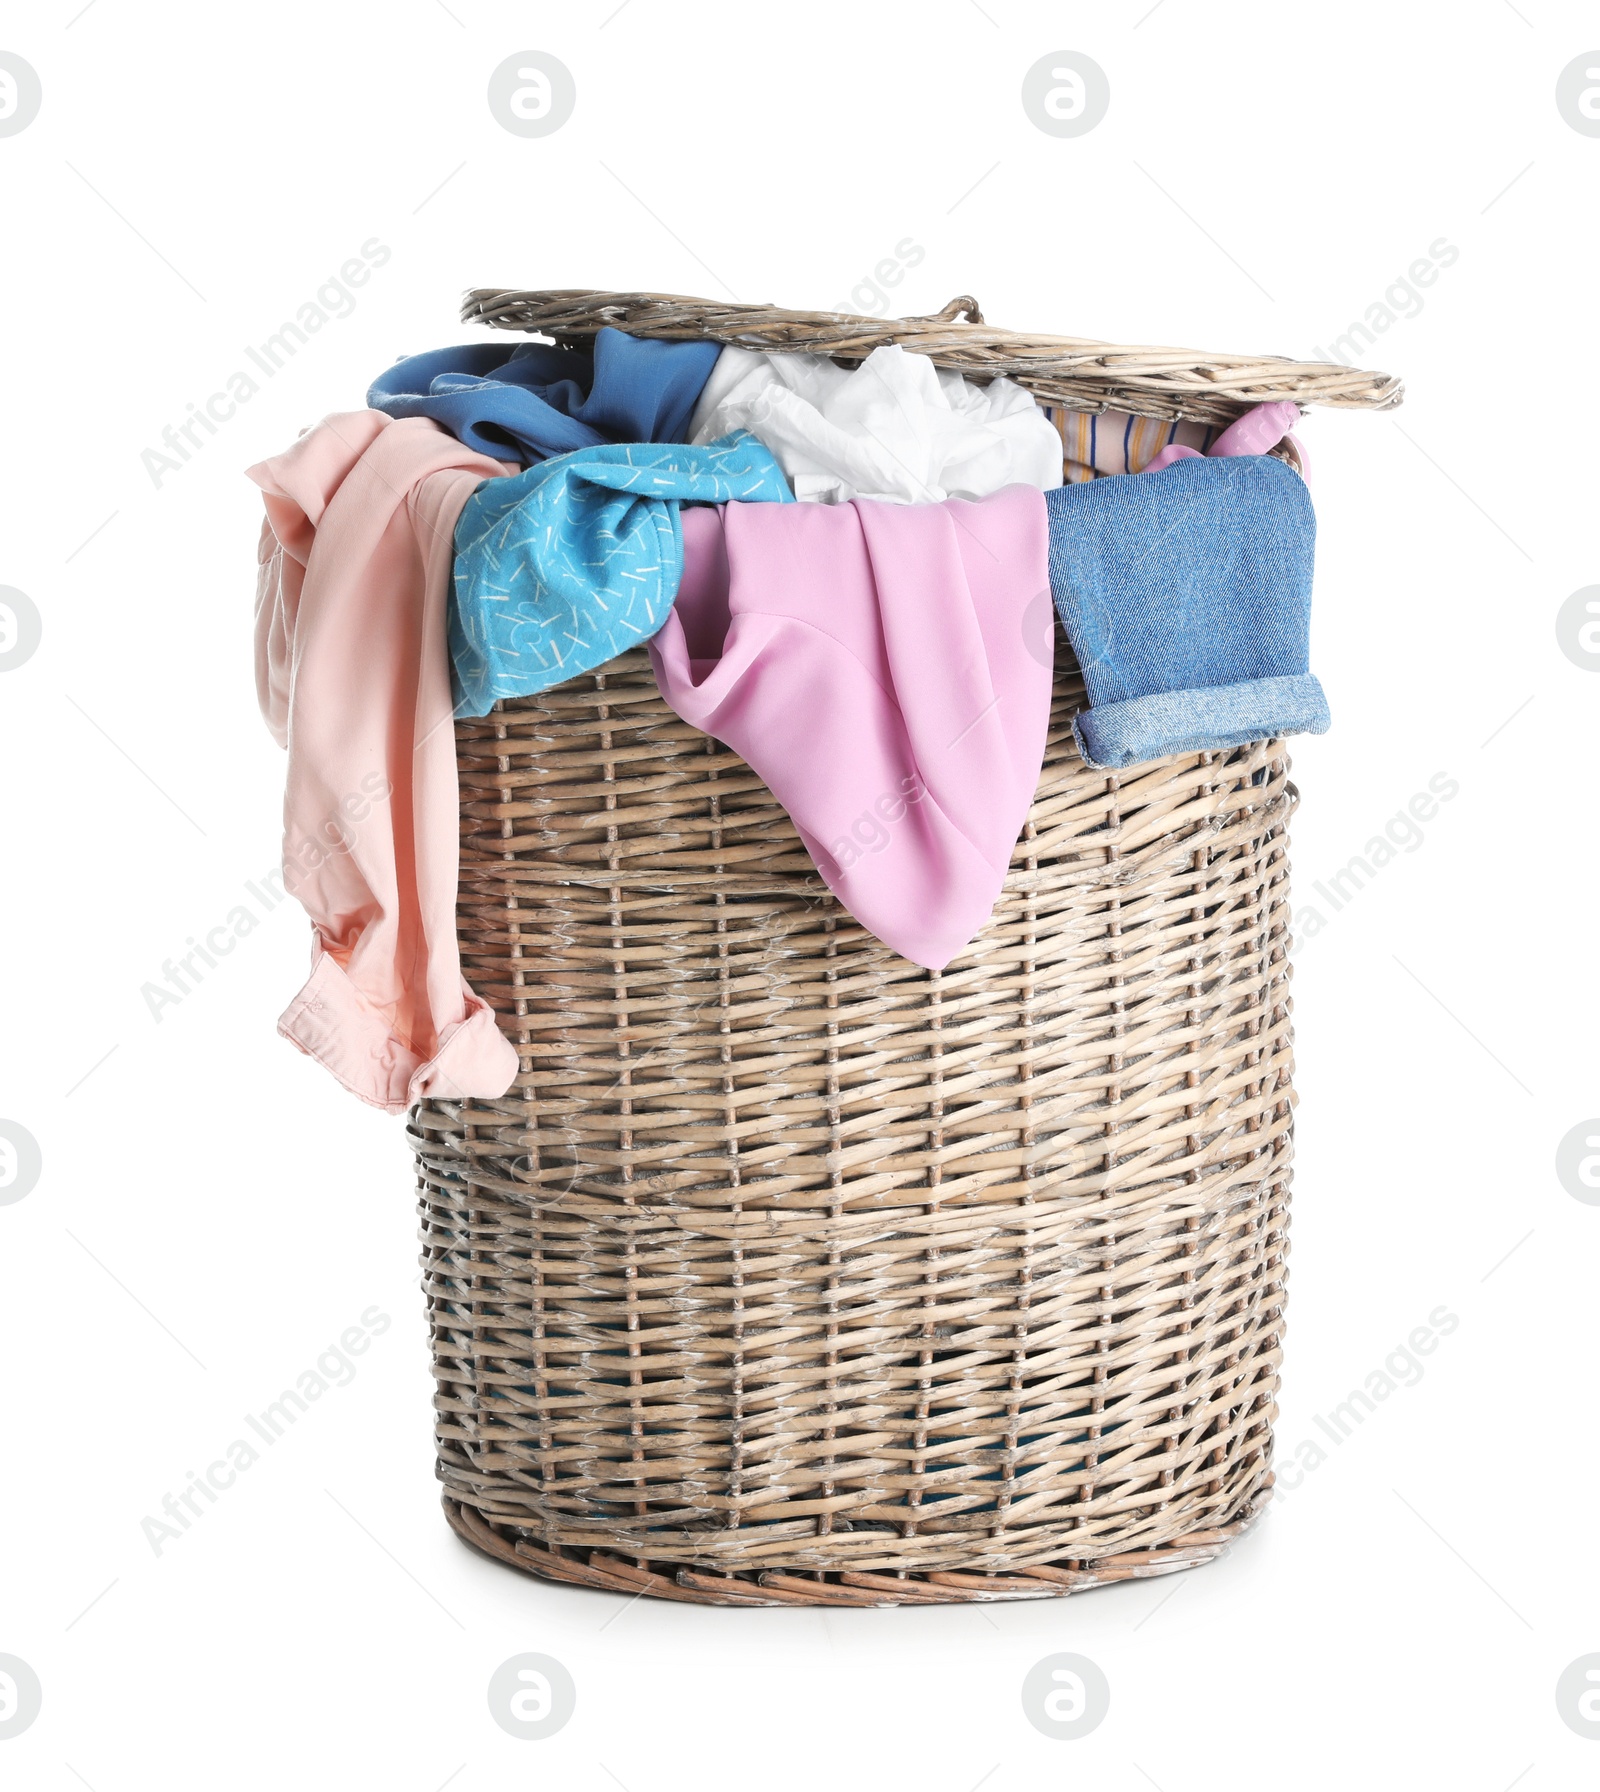 Photo of Wicker basket full of dirty laundry isolated on white